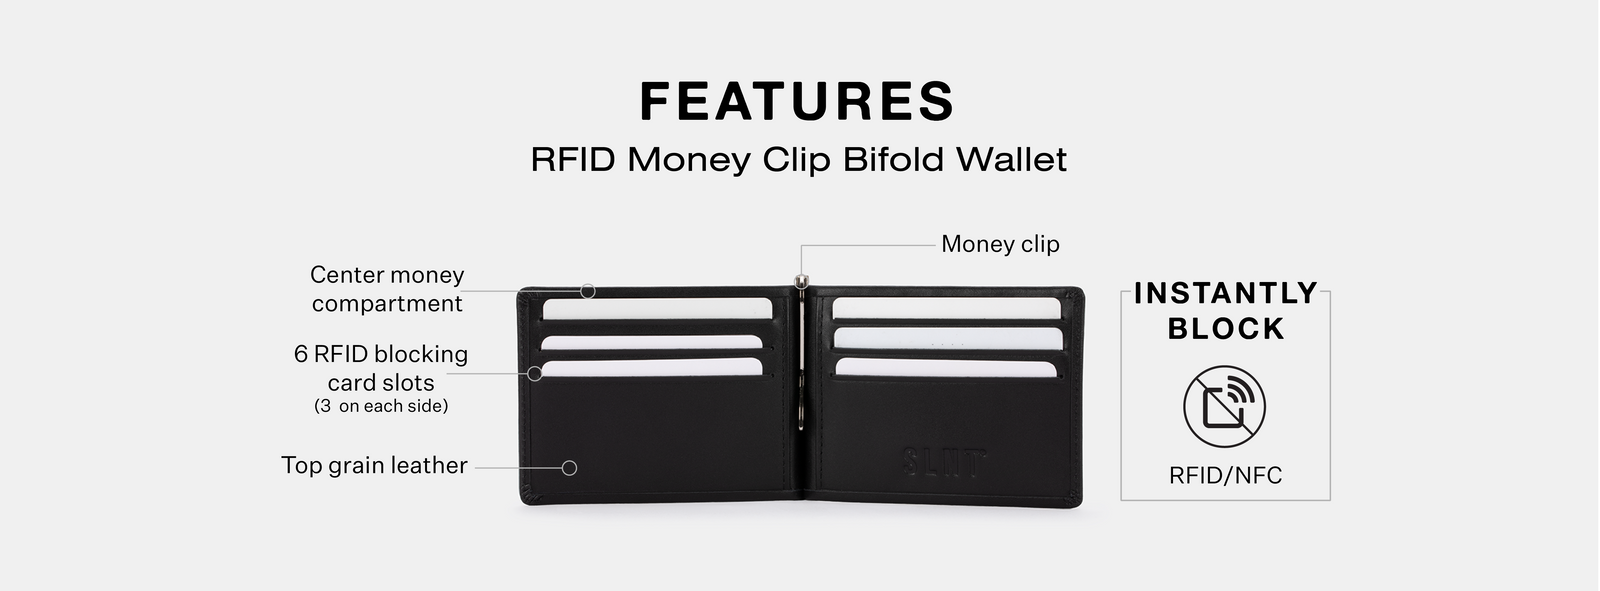 RFID Bifold Wallet with Money Clip - SLNT®